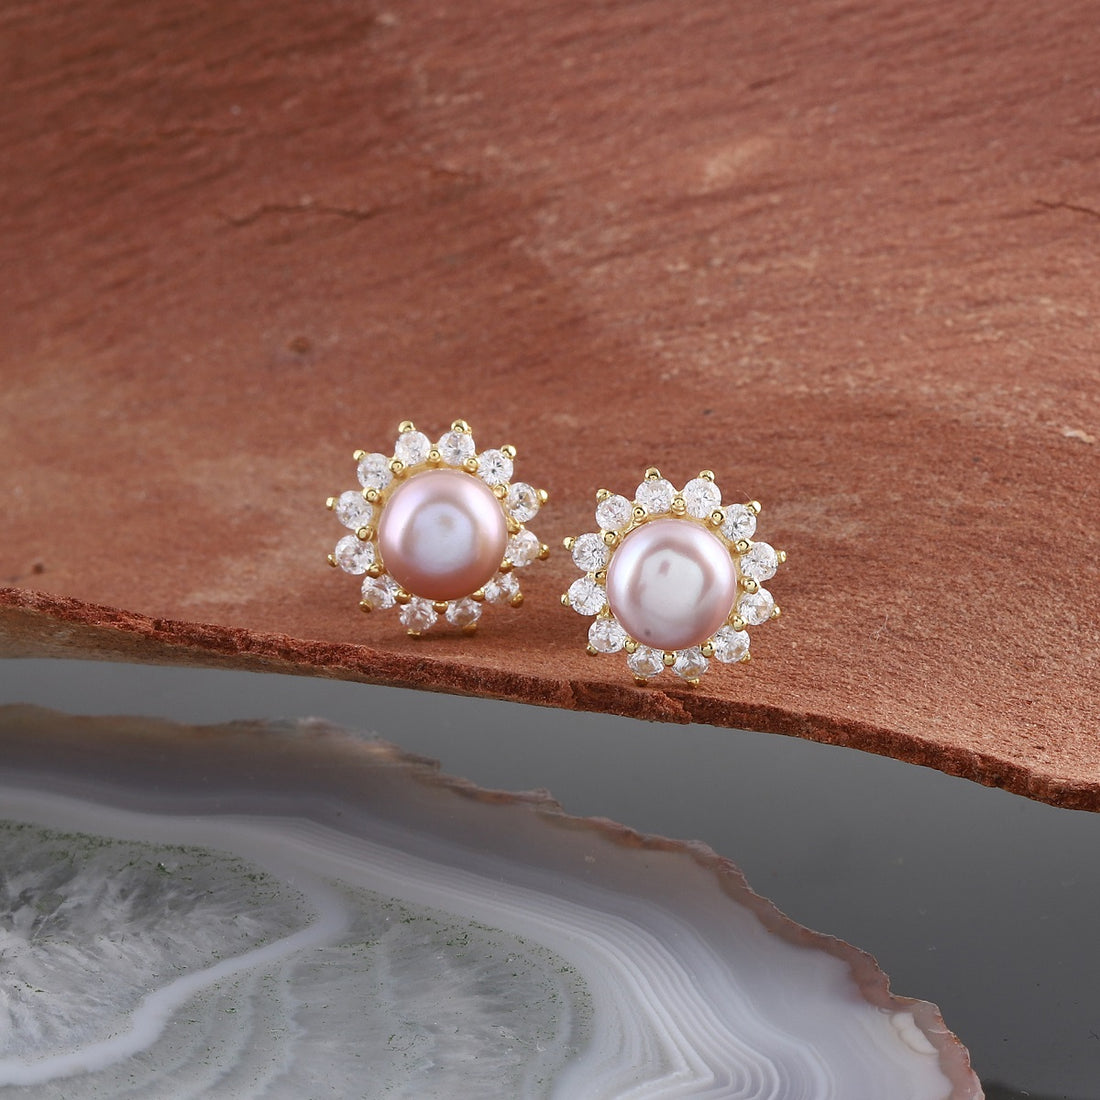 Gemstone Earrings Featuring Pink Pearls and Sparkling Zircons